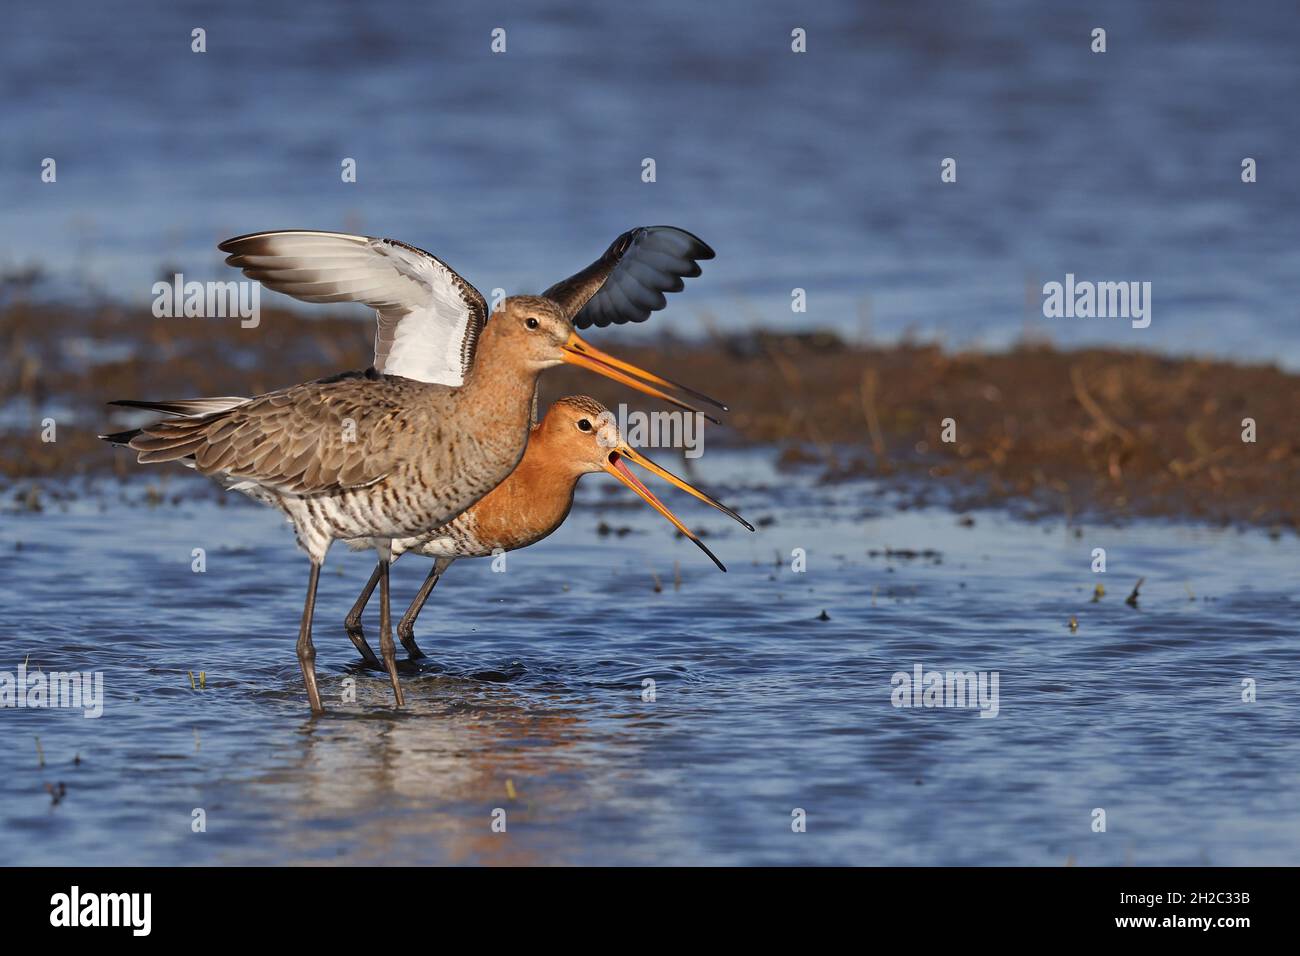 black-tailed godwit (Limosa limosa), male stands calling behind the female in shallow water after mating, Netherlands, Gelderland Stock Photo